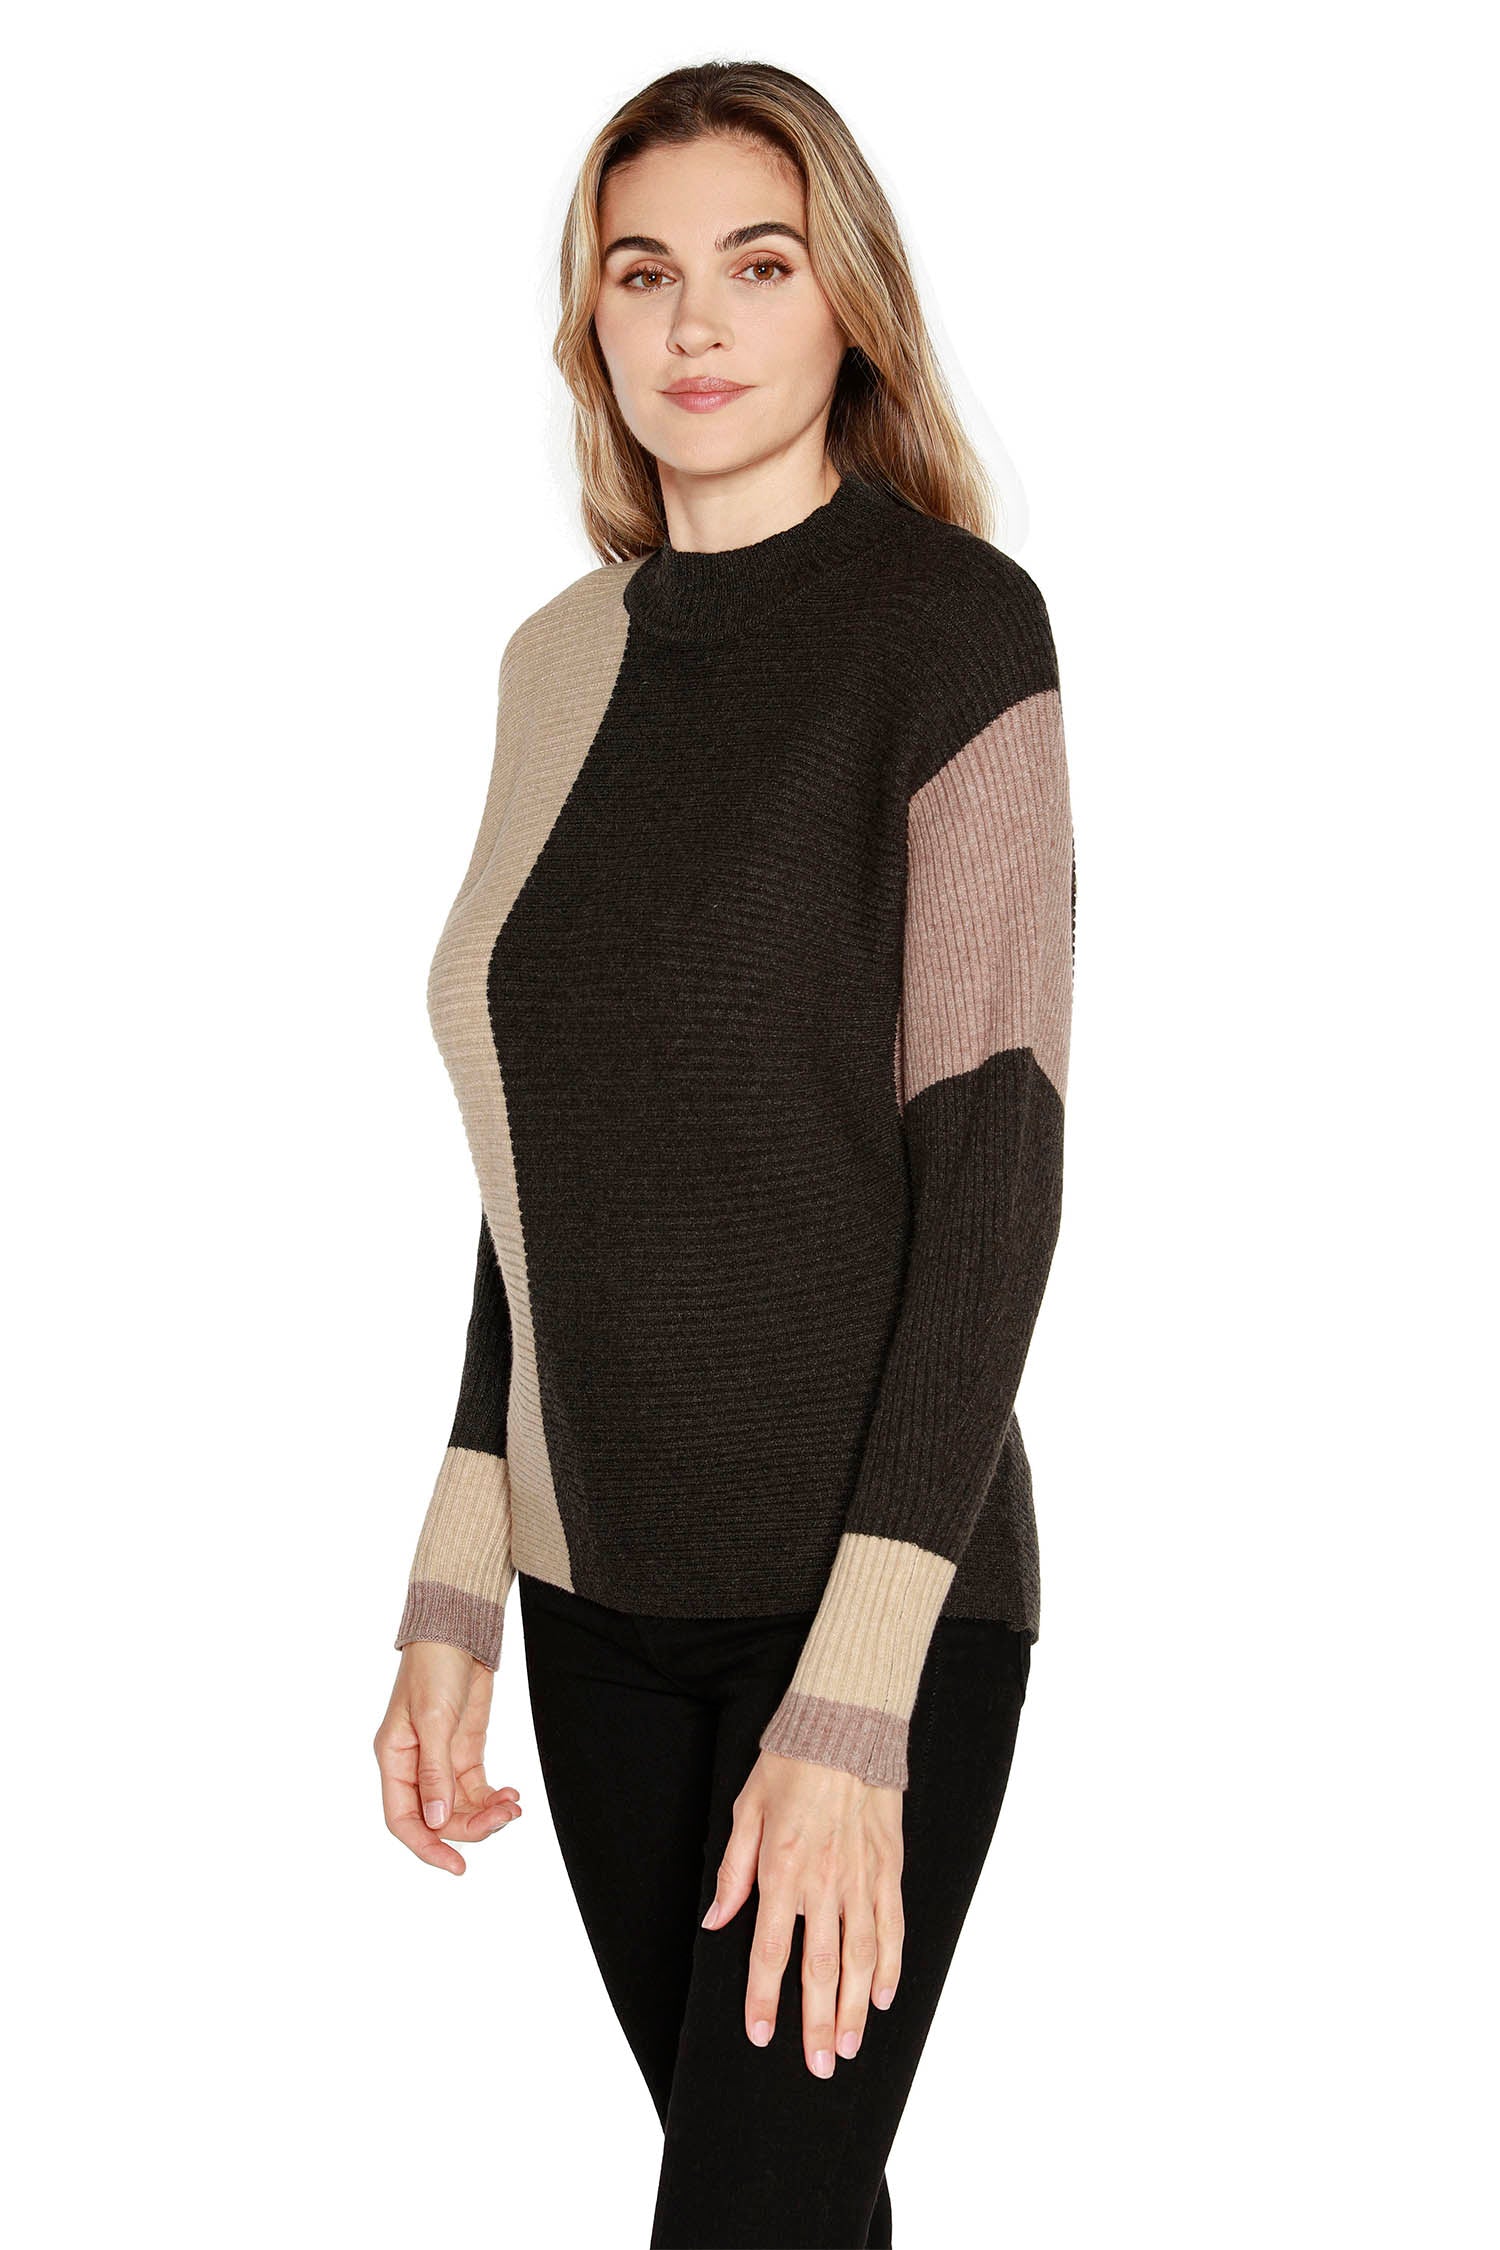 Women's Pullover Sweater in a Soft Mini Rib Color Block Knit with a Mock Neck